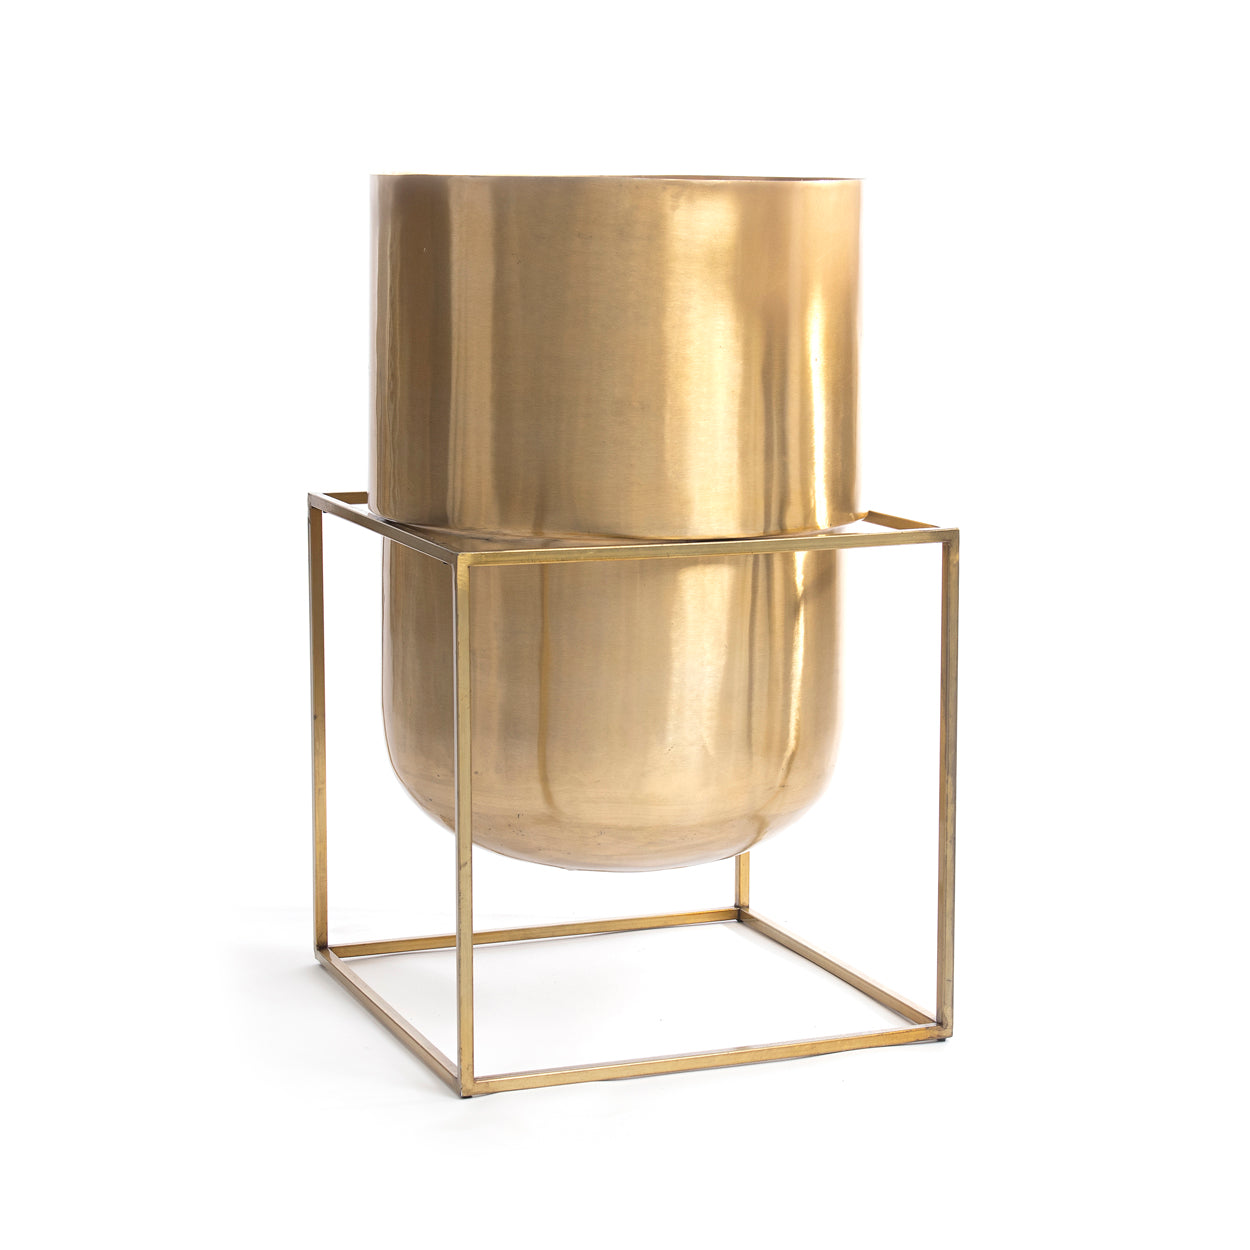 THE SQUARE BOX Brass Planter large size